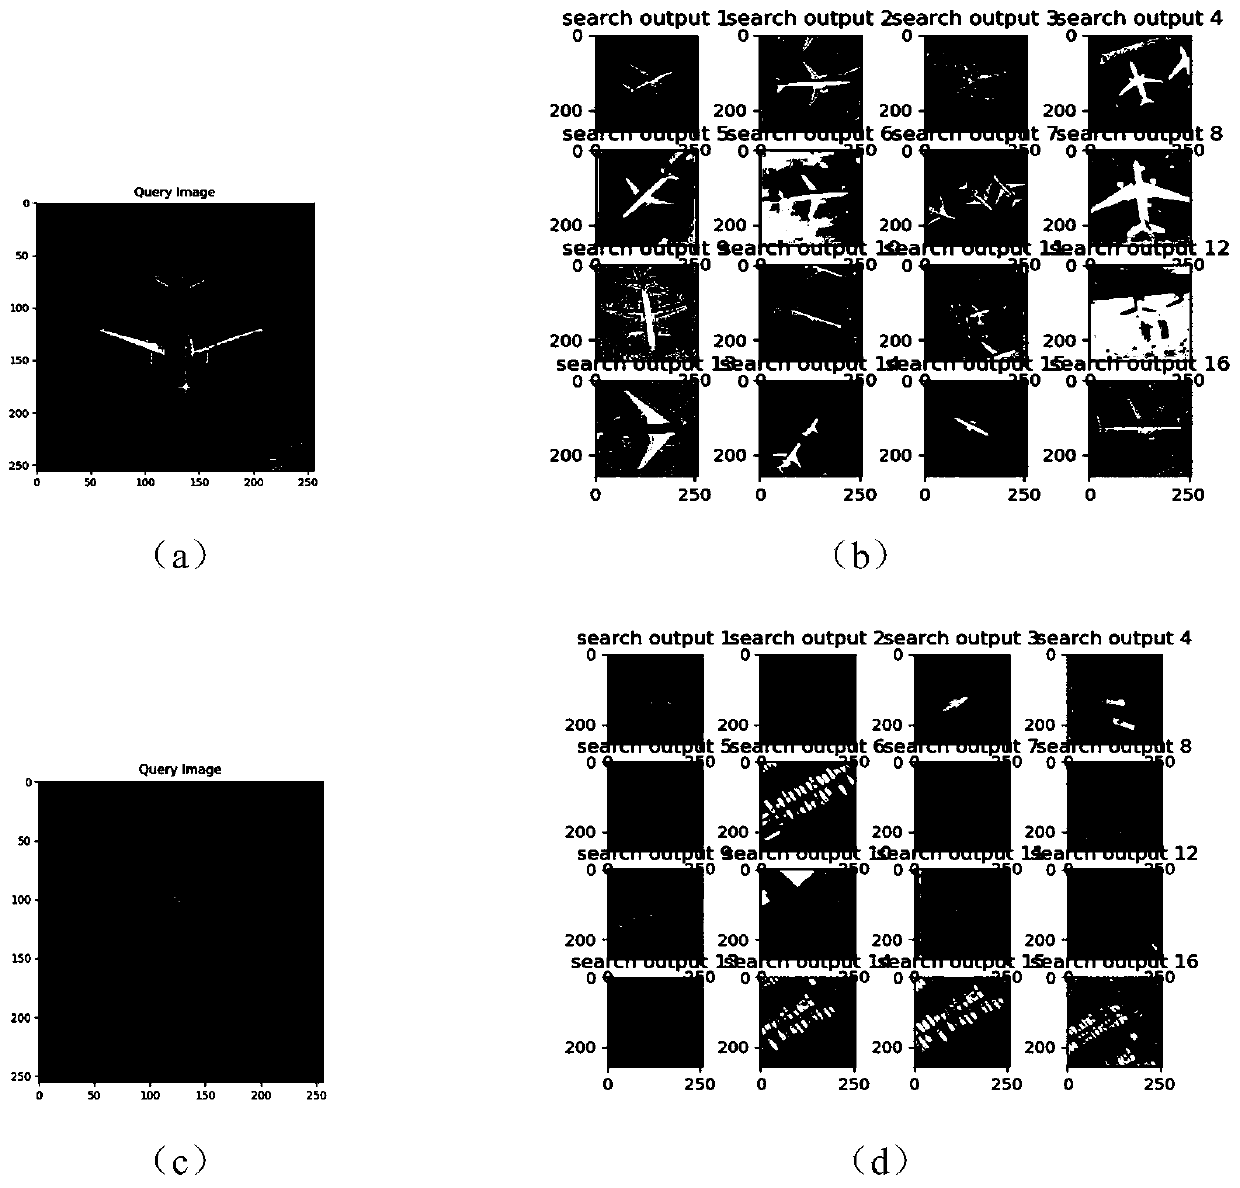 remote sensing image rapid target detection method based on a deep Hash auxiliary network